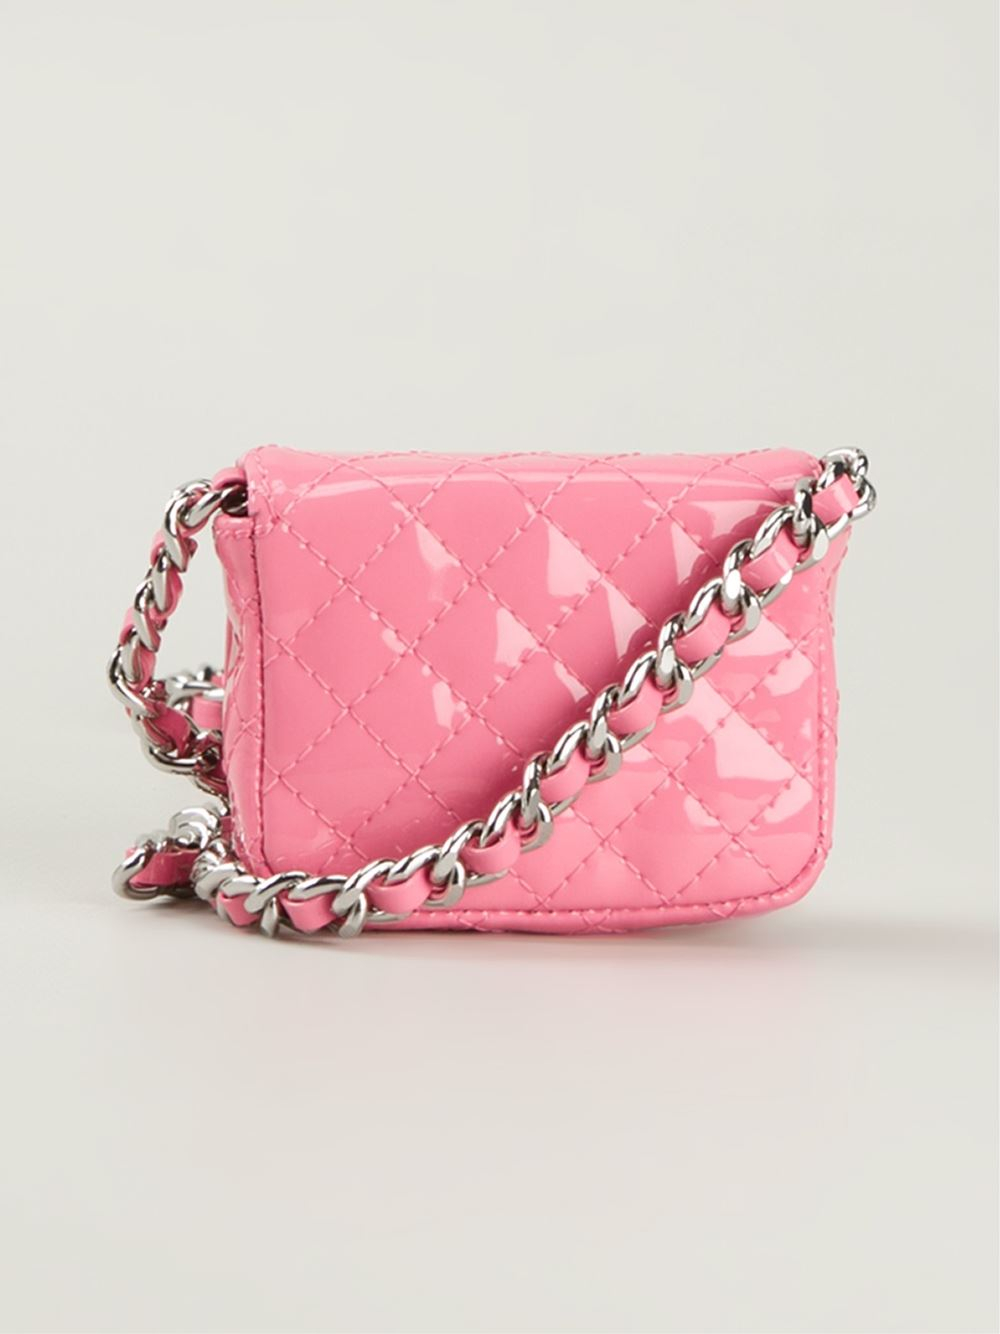 Moschino Mini Quilted Crossbody Bag in Pink | Lyst